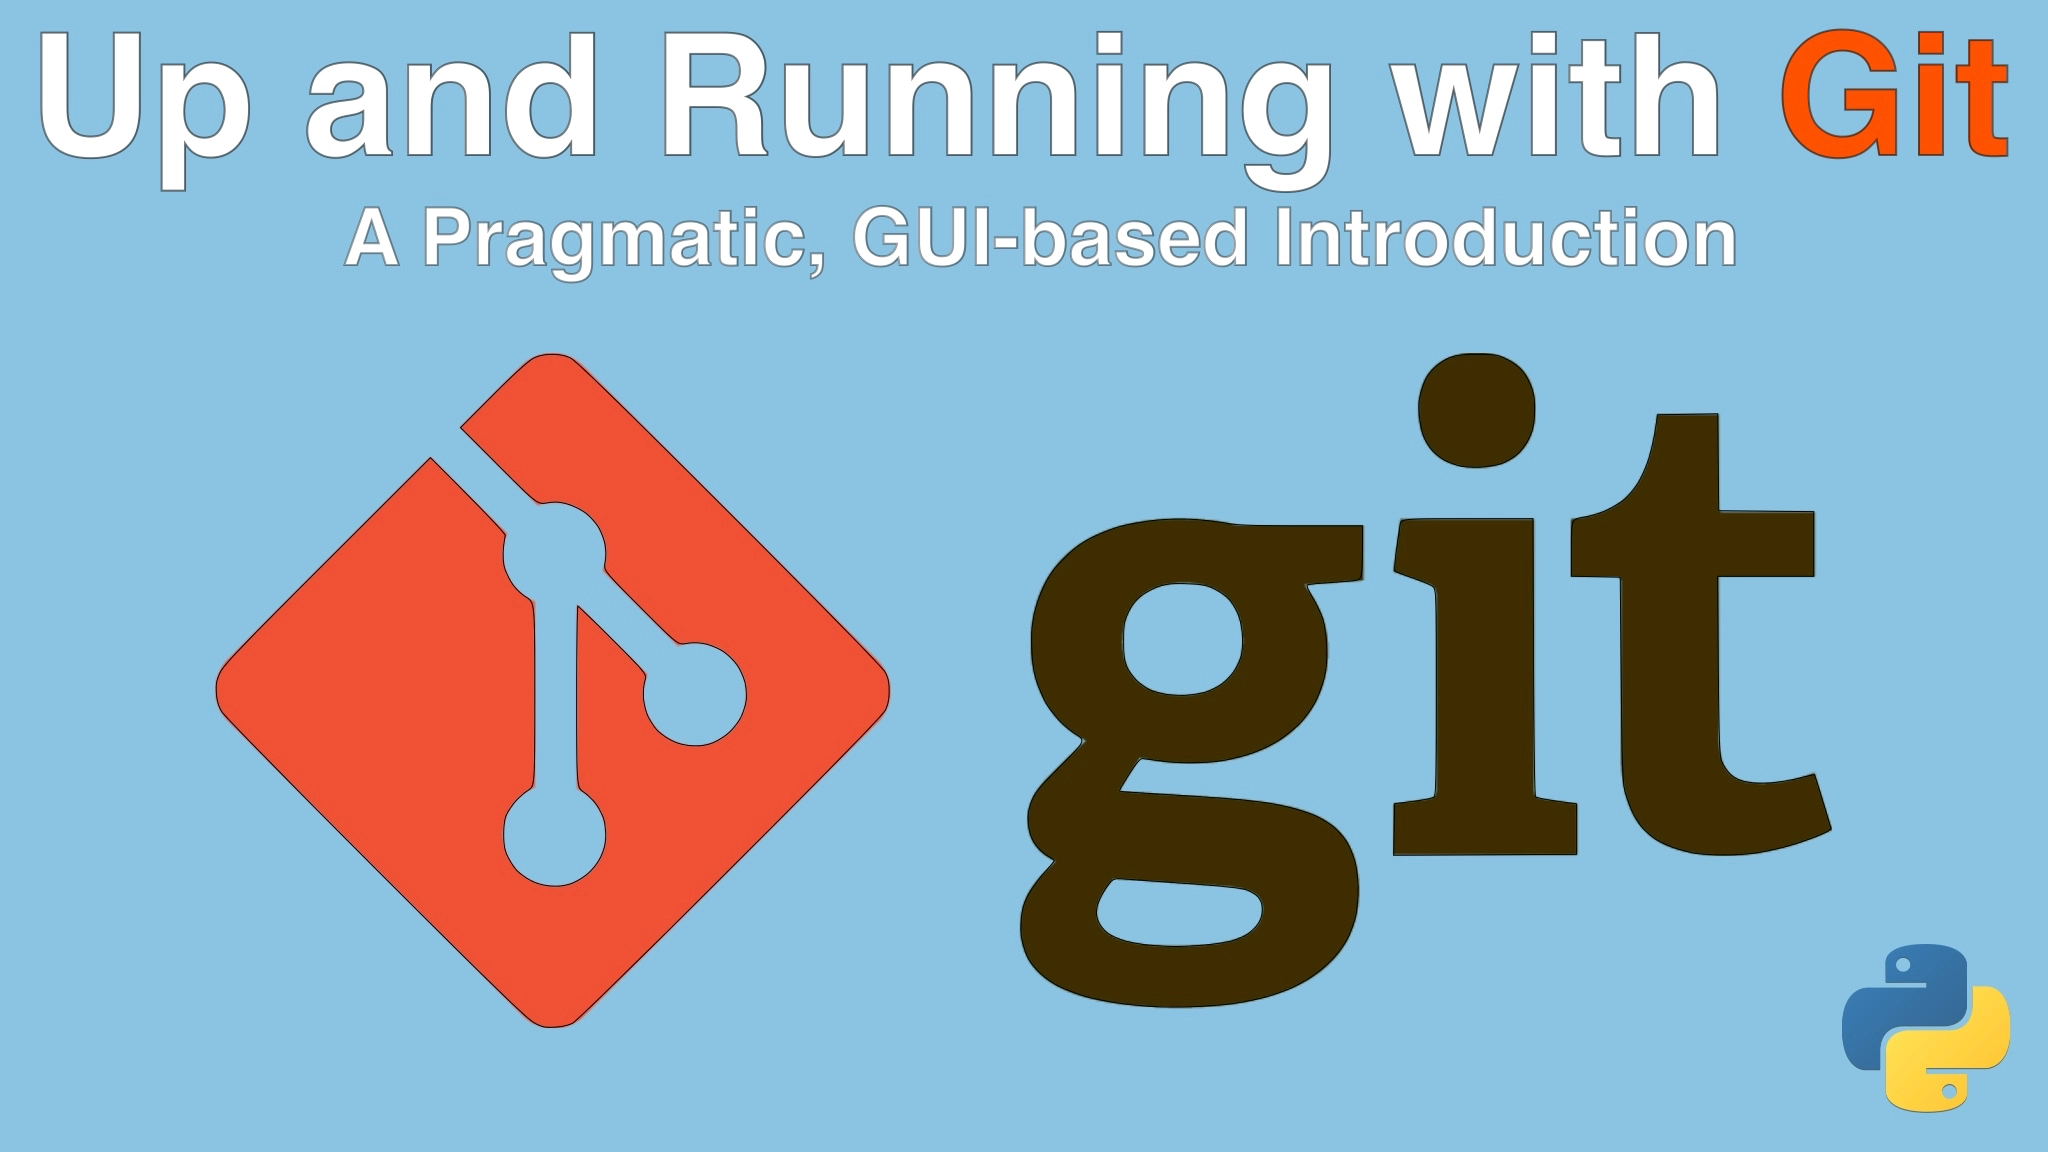 Course: Up and Running with Git